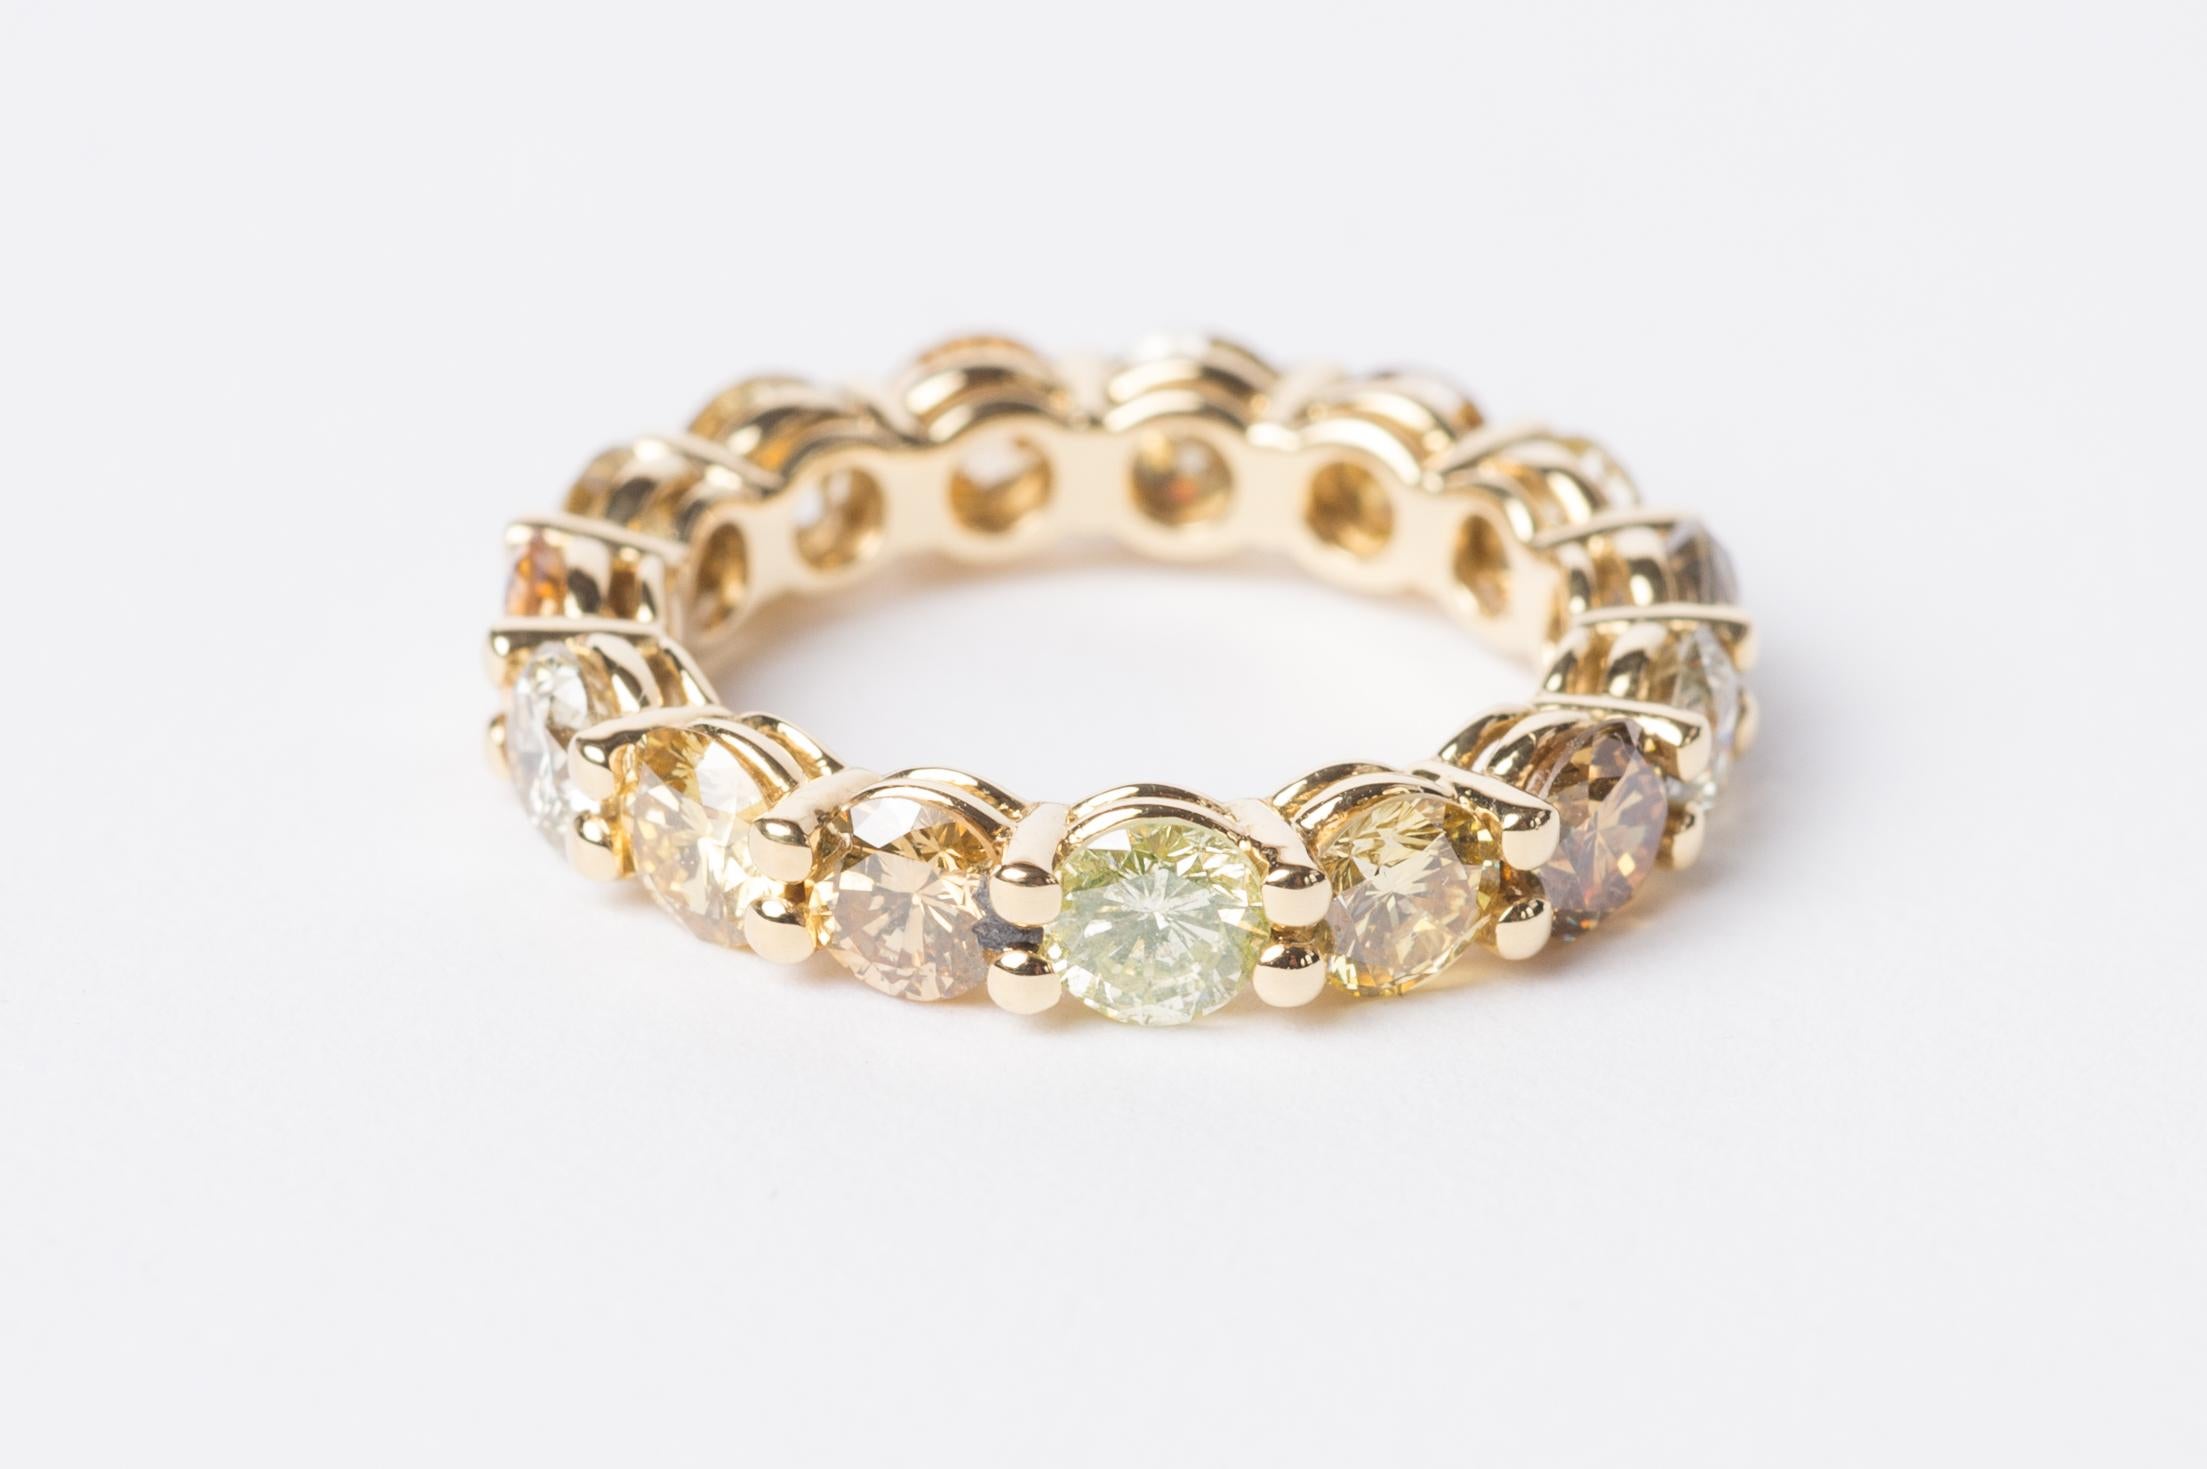 This classic yet modern eternity ring features differently coloured fancy diamonds in rich, earthy tones, making it a unique piece full of warmth and love. The brown, yellow and grey stones in round brilliant cuts are arranged on a yellow gold band